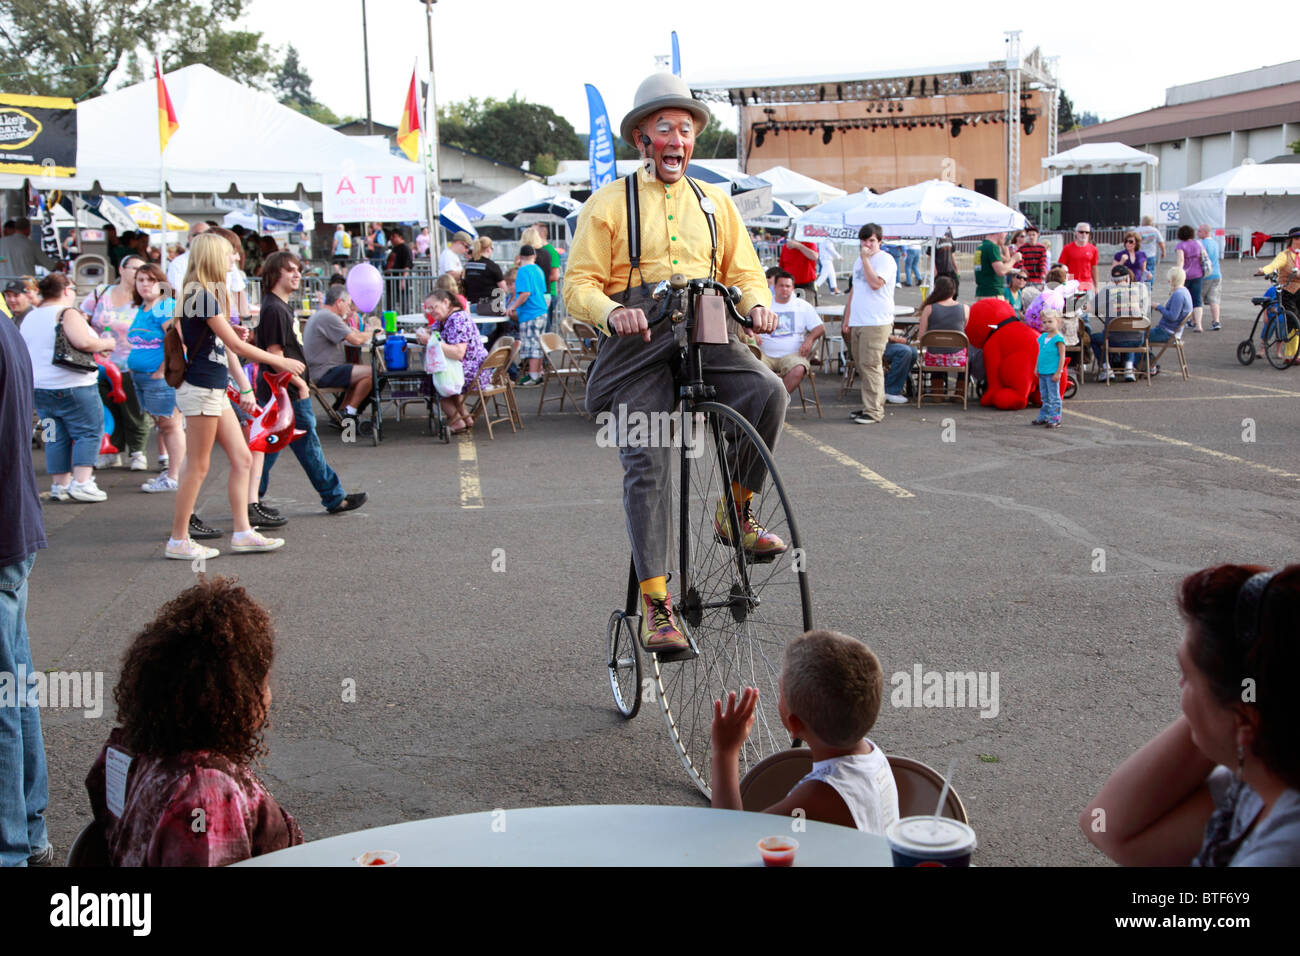 A clown on a unicycle entertains the Carnival crowd. Stock Photo